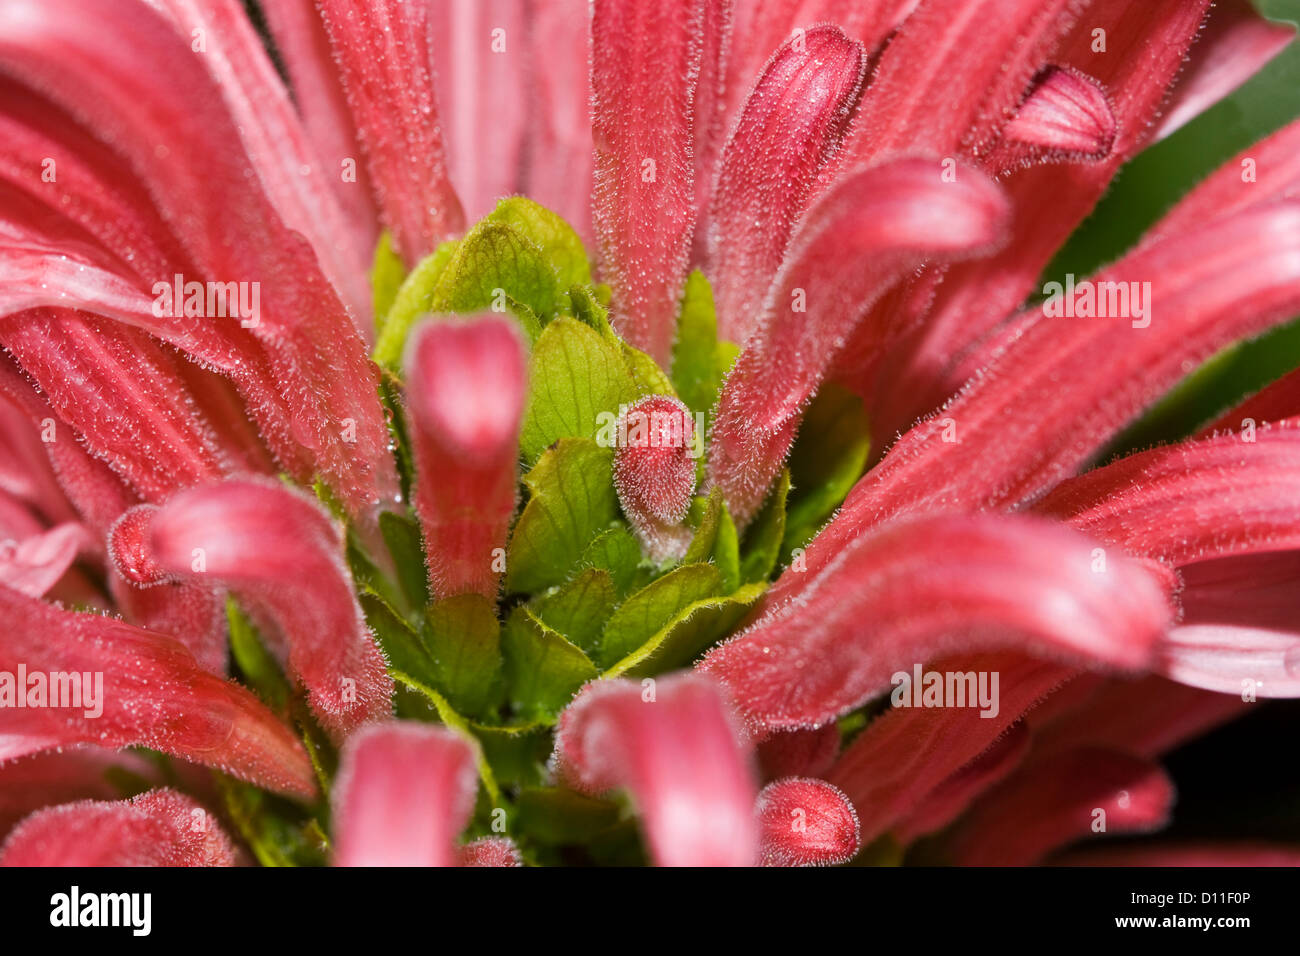 Closeup / macro shot of cluster of bright pink flowers of Justicia carnea - Brazilian plume flower Stock Photo